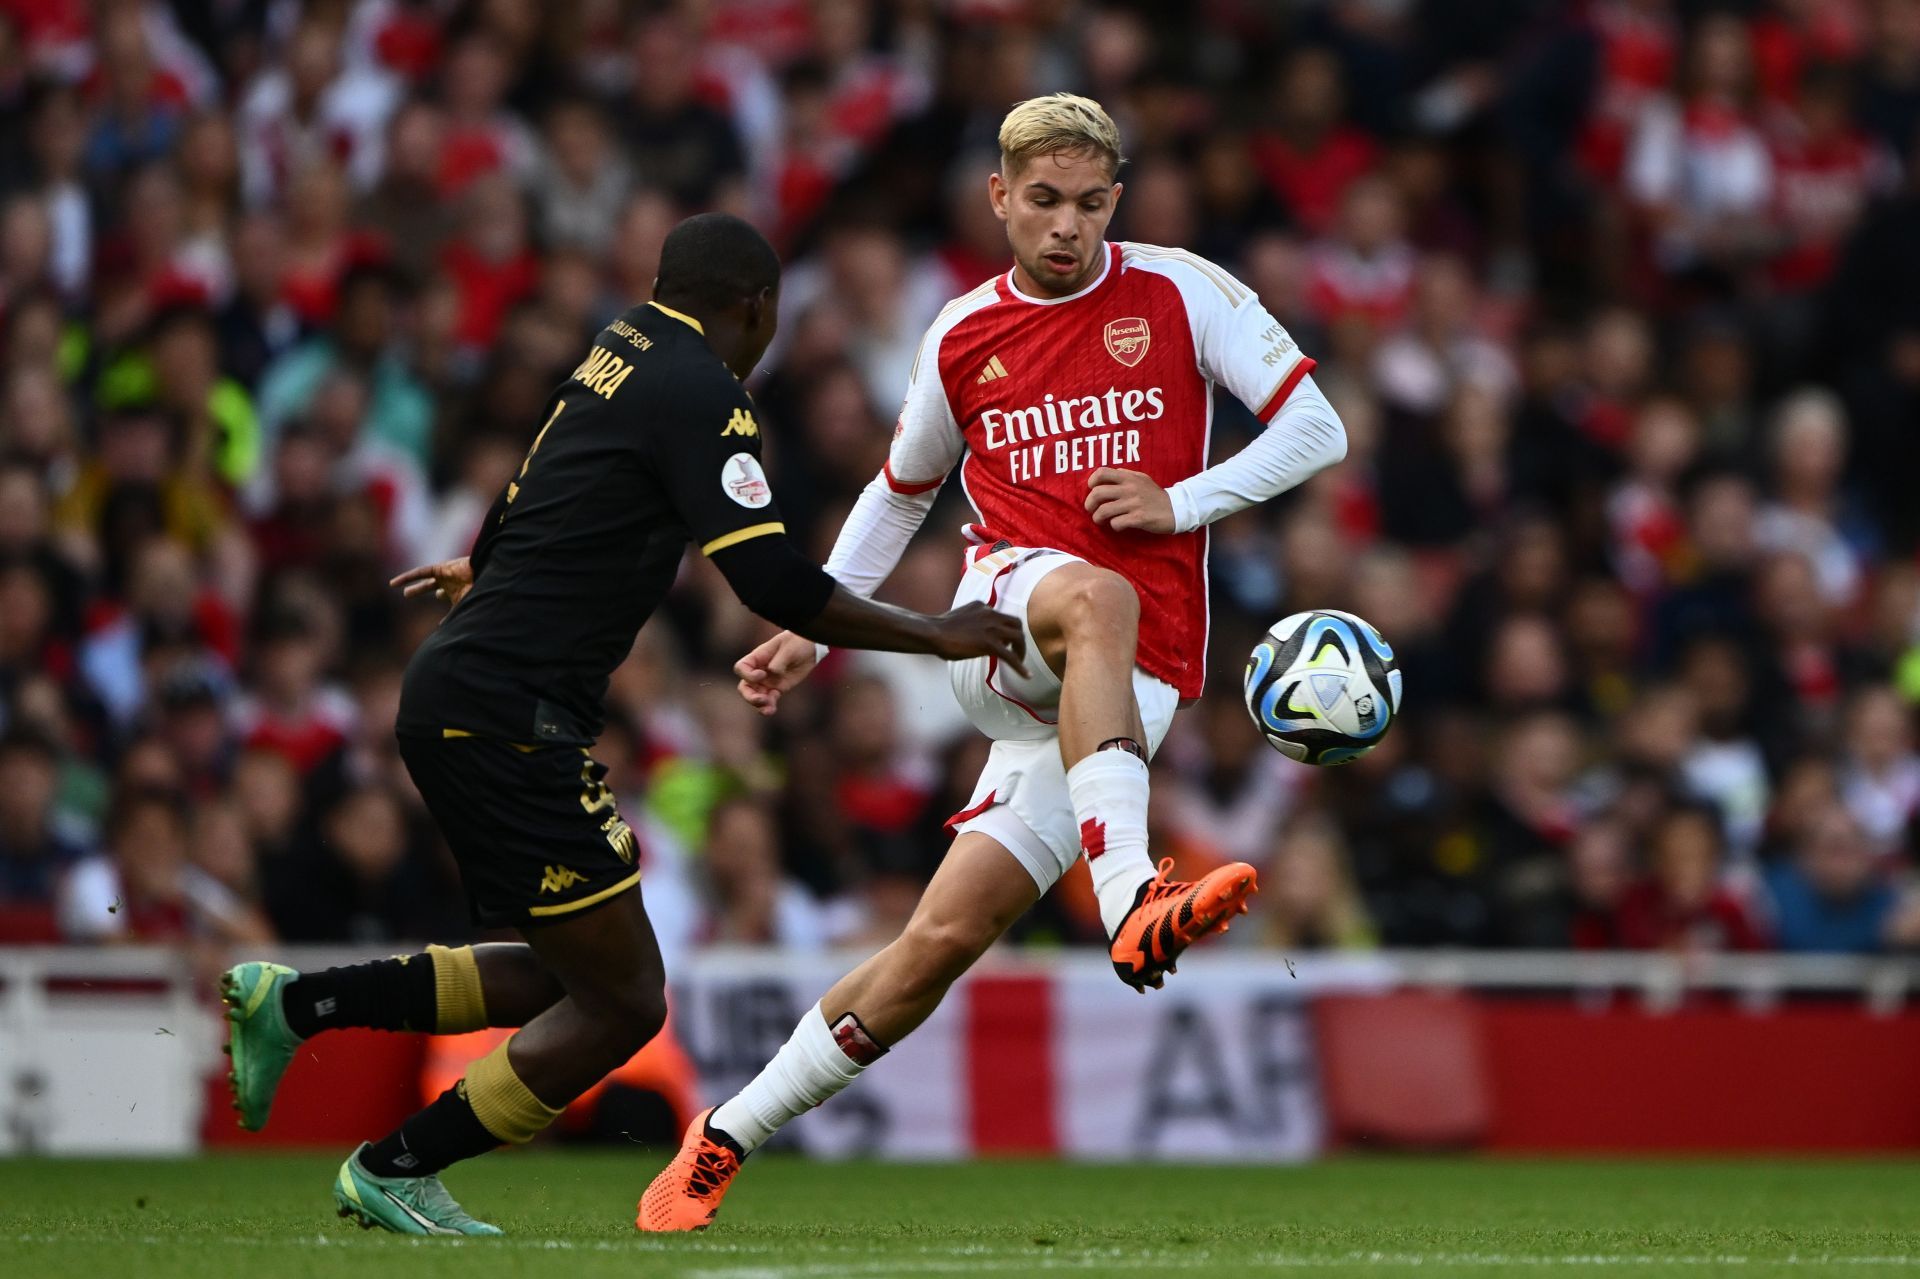 Emile Smith Rowe is unlikely to leave the Emirates this summer.